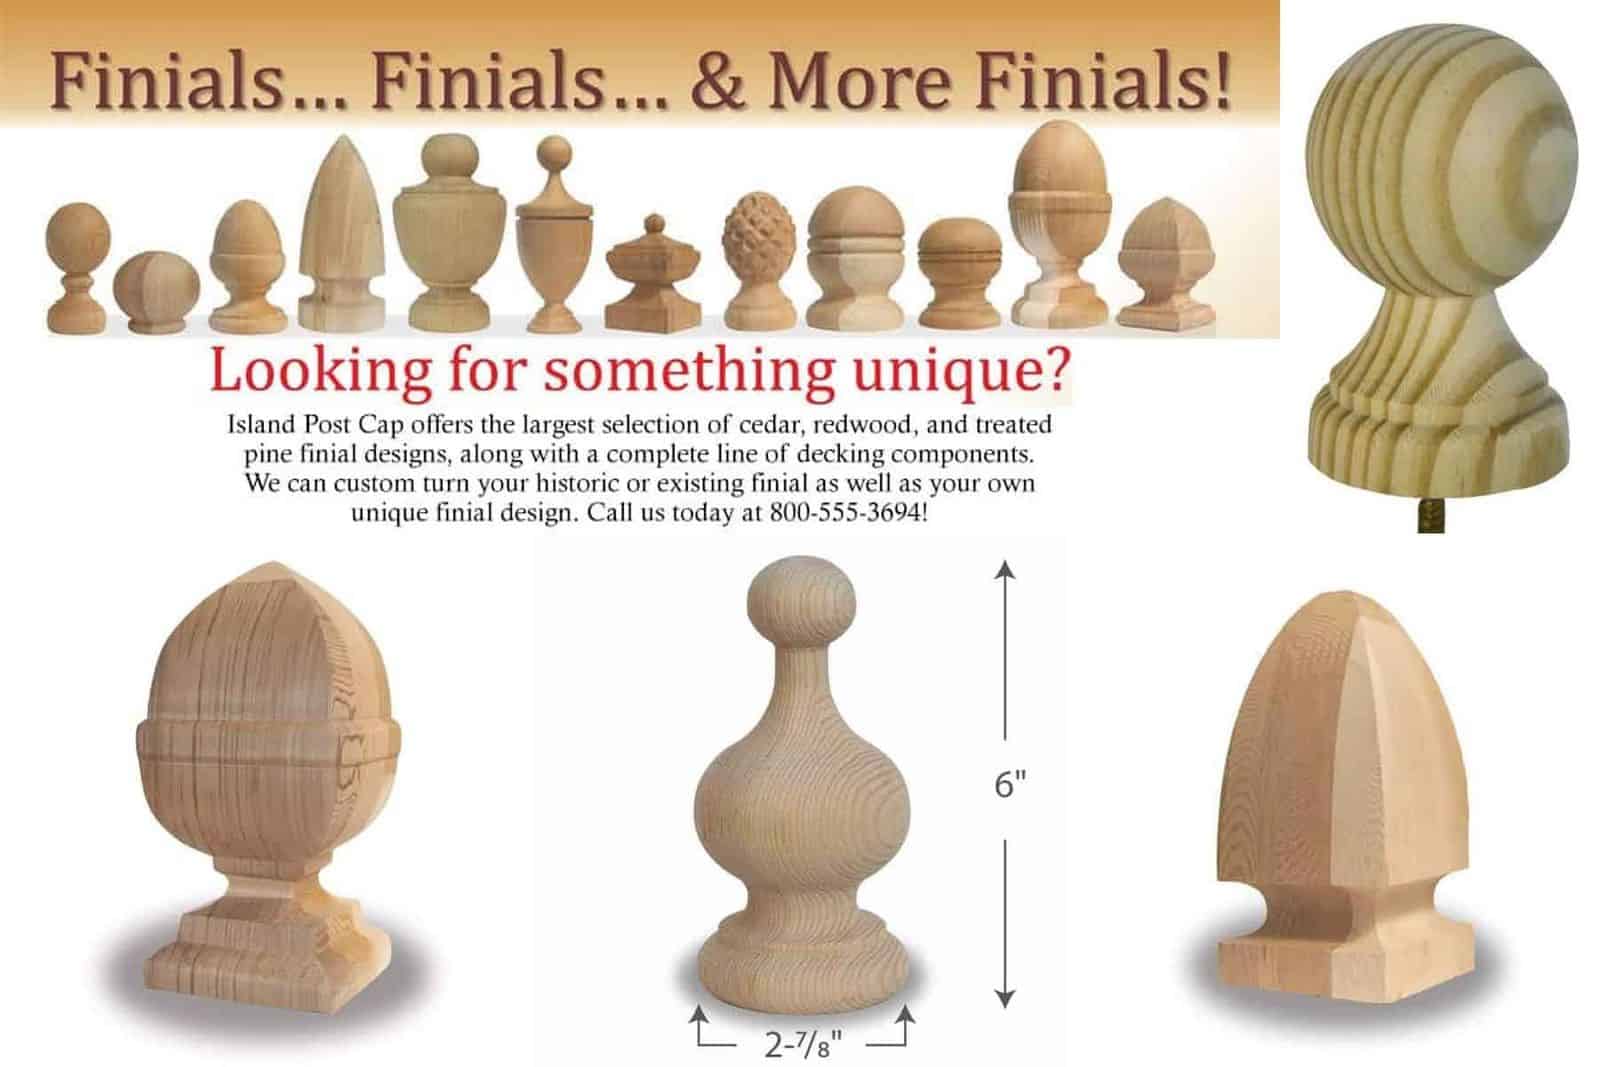 Island Post Cap offers wide variety of decorative finials, including custom made from your design or existing finial.